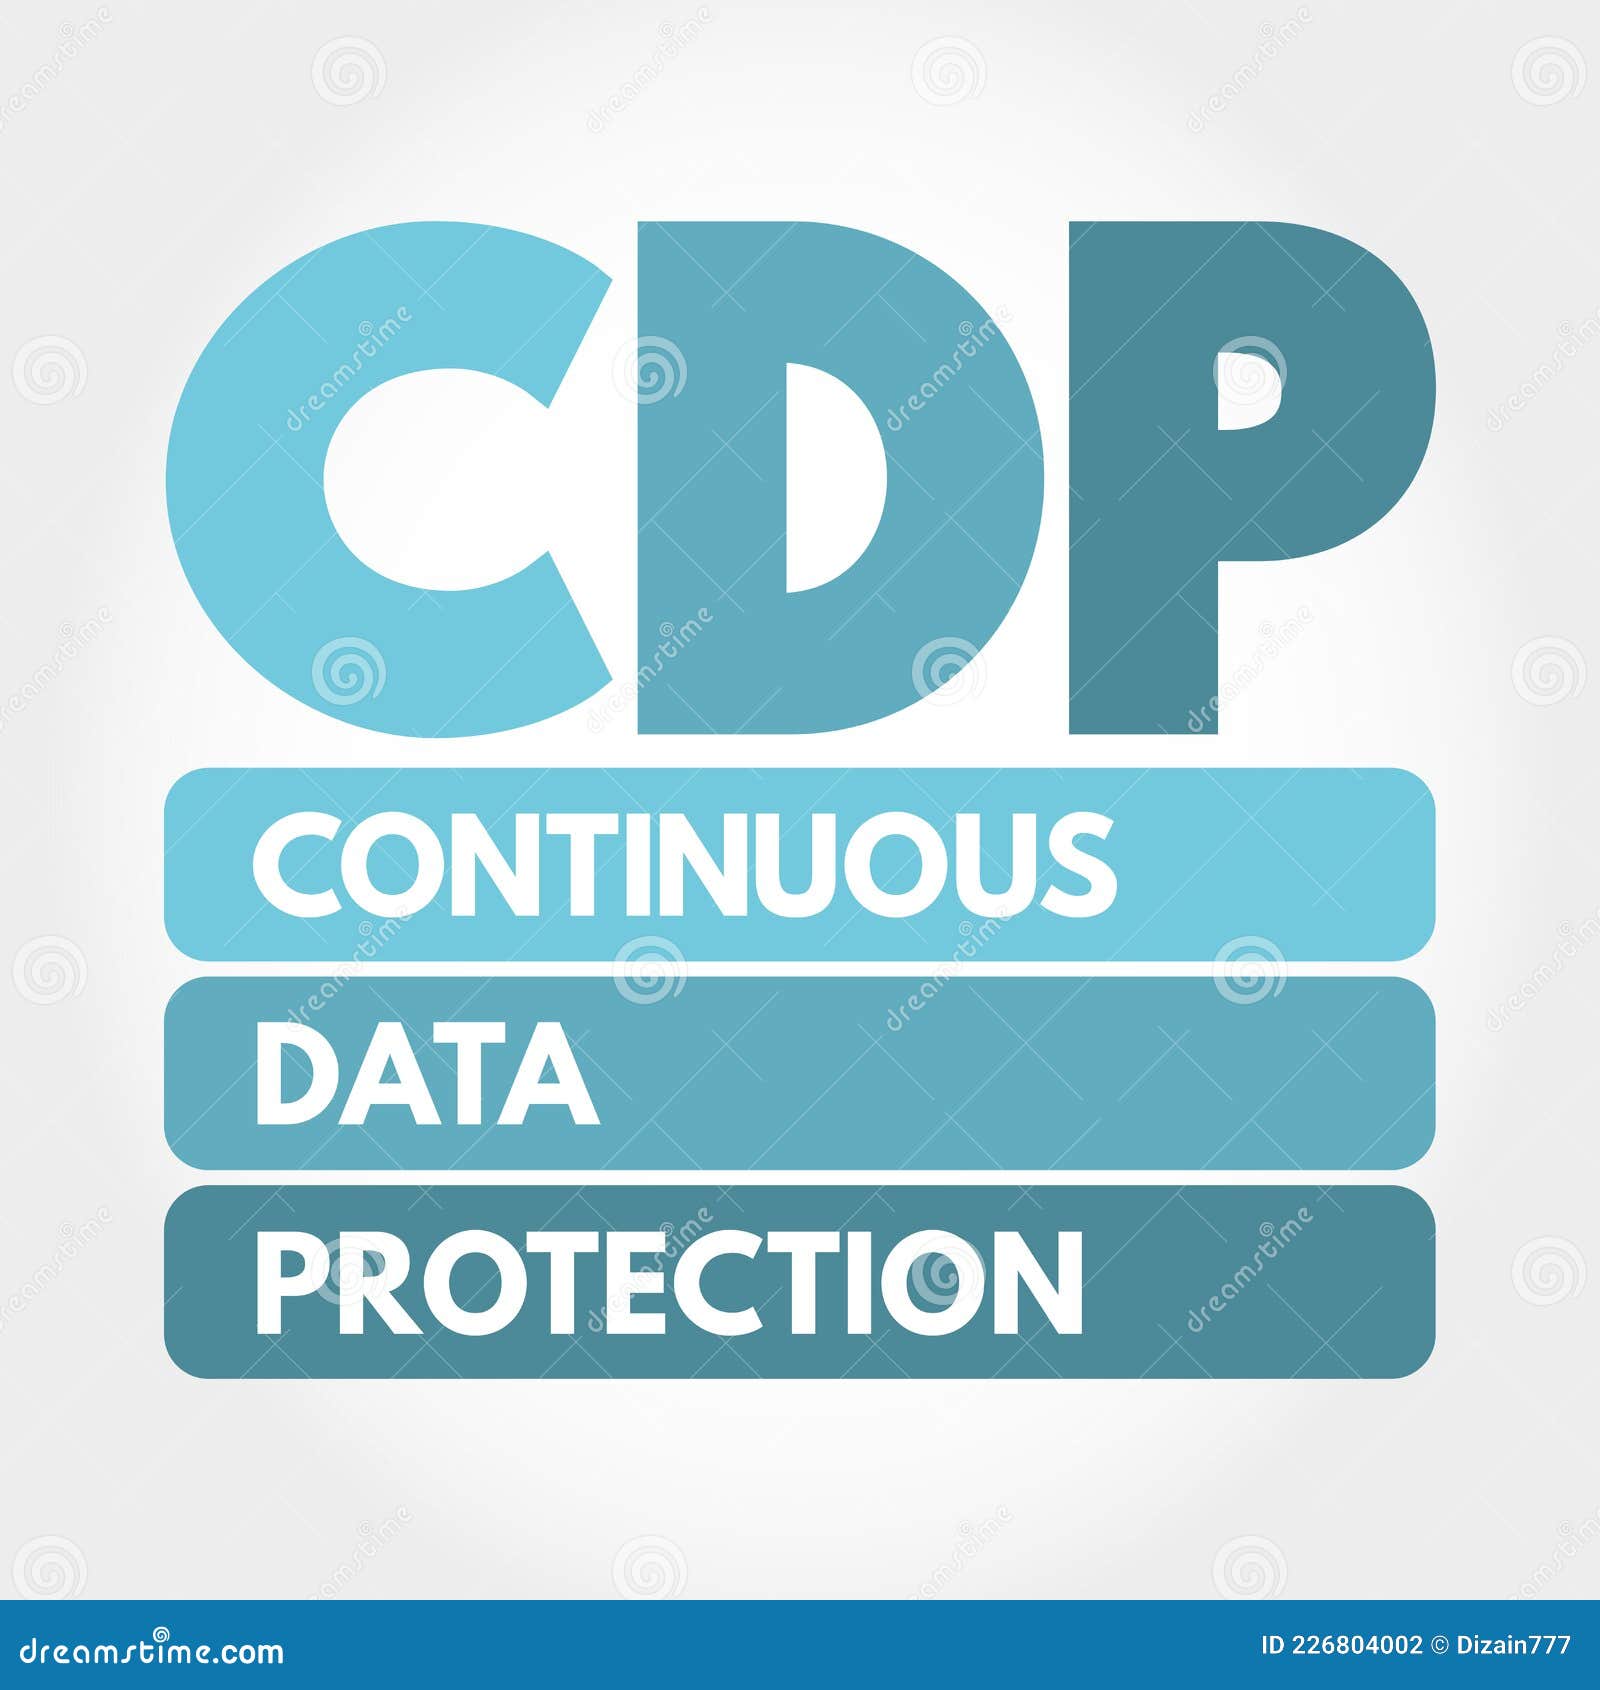 CDP - Continuous Data Protection Acronym, Technology Concept Background  Stock Illustration - Illustration of change, restore: 226804002